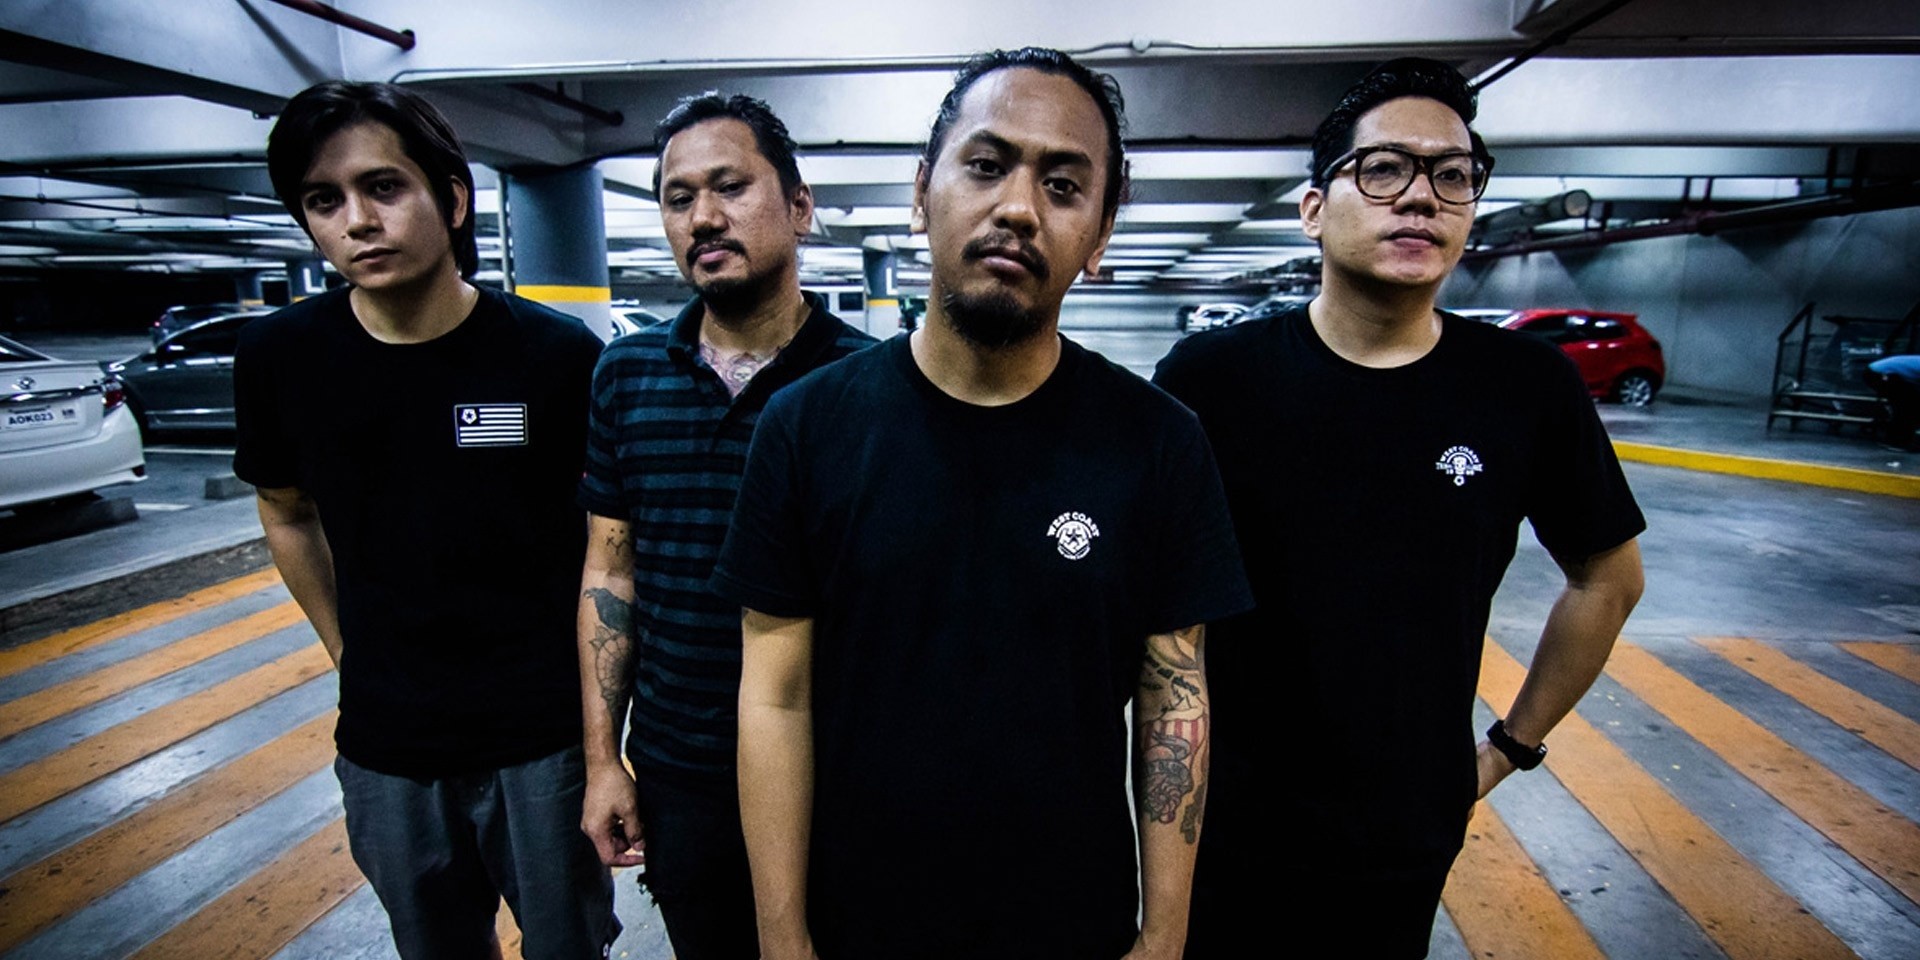 Typecast to hold music video launch for new single 'Perfect Posture'